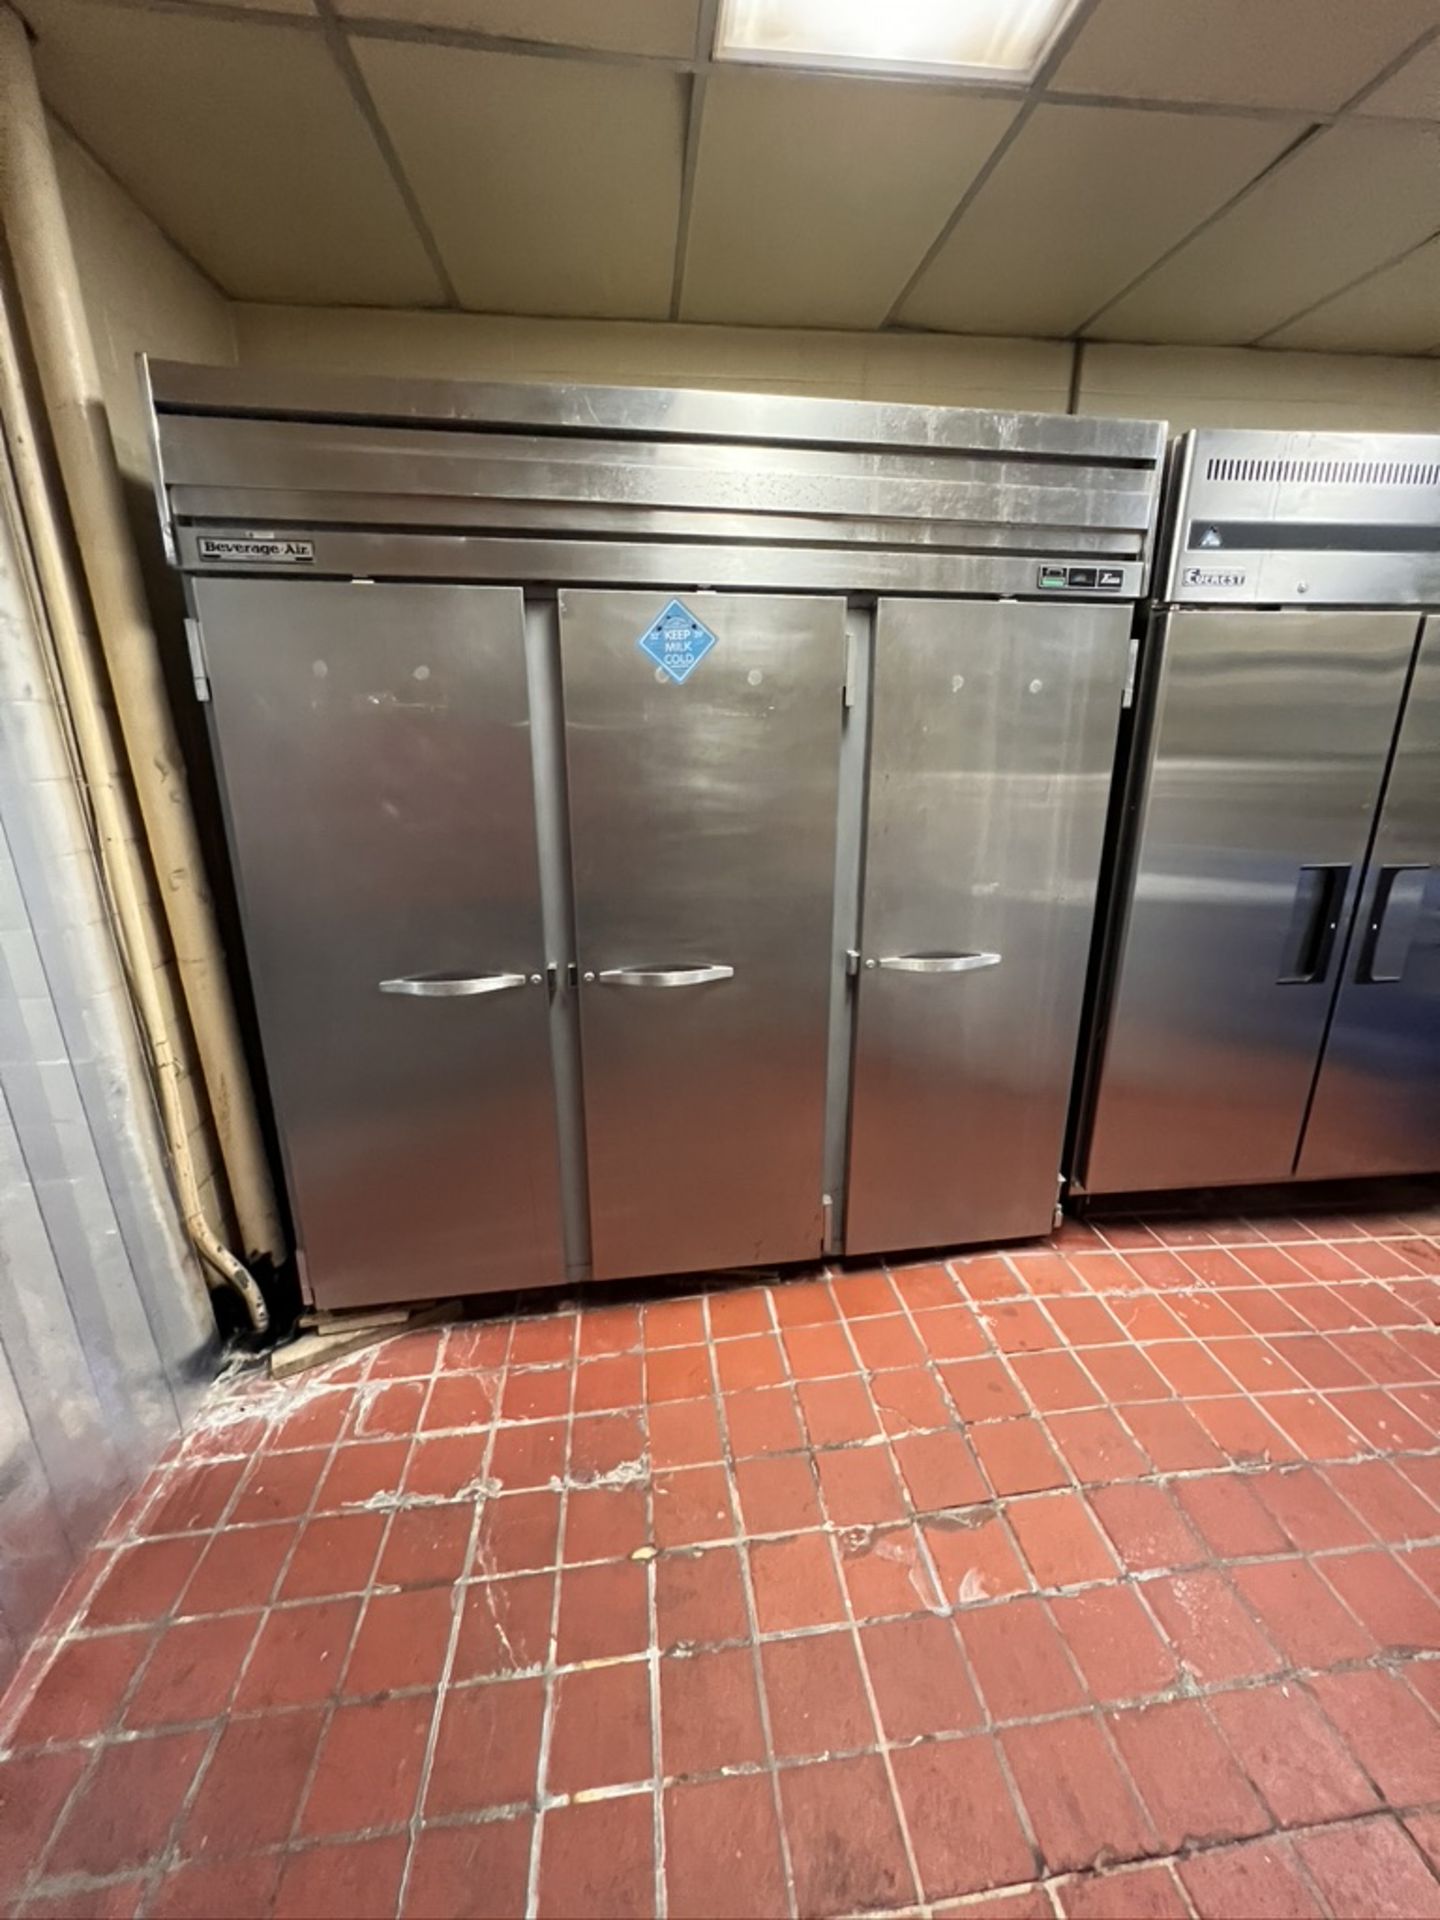 BEVERAGE AIRE 3-DOOR S/S REFRIGERATOR  (INV#87405)(Located @ the MDG Showroom v2.0 in Monroeville,